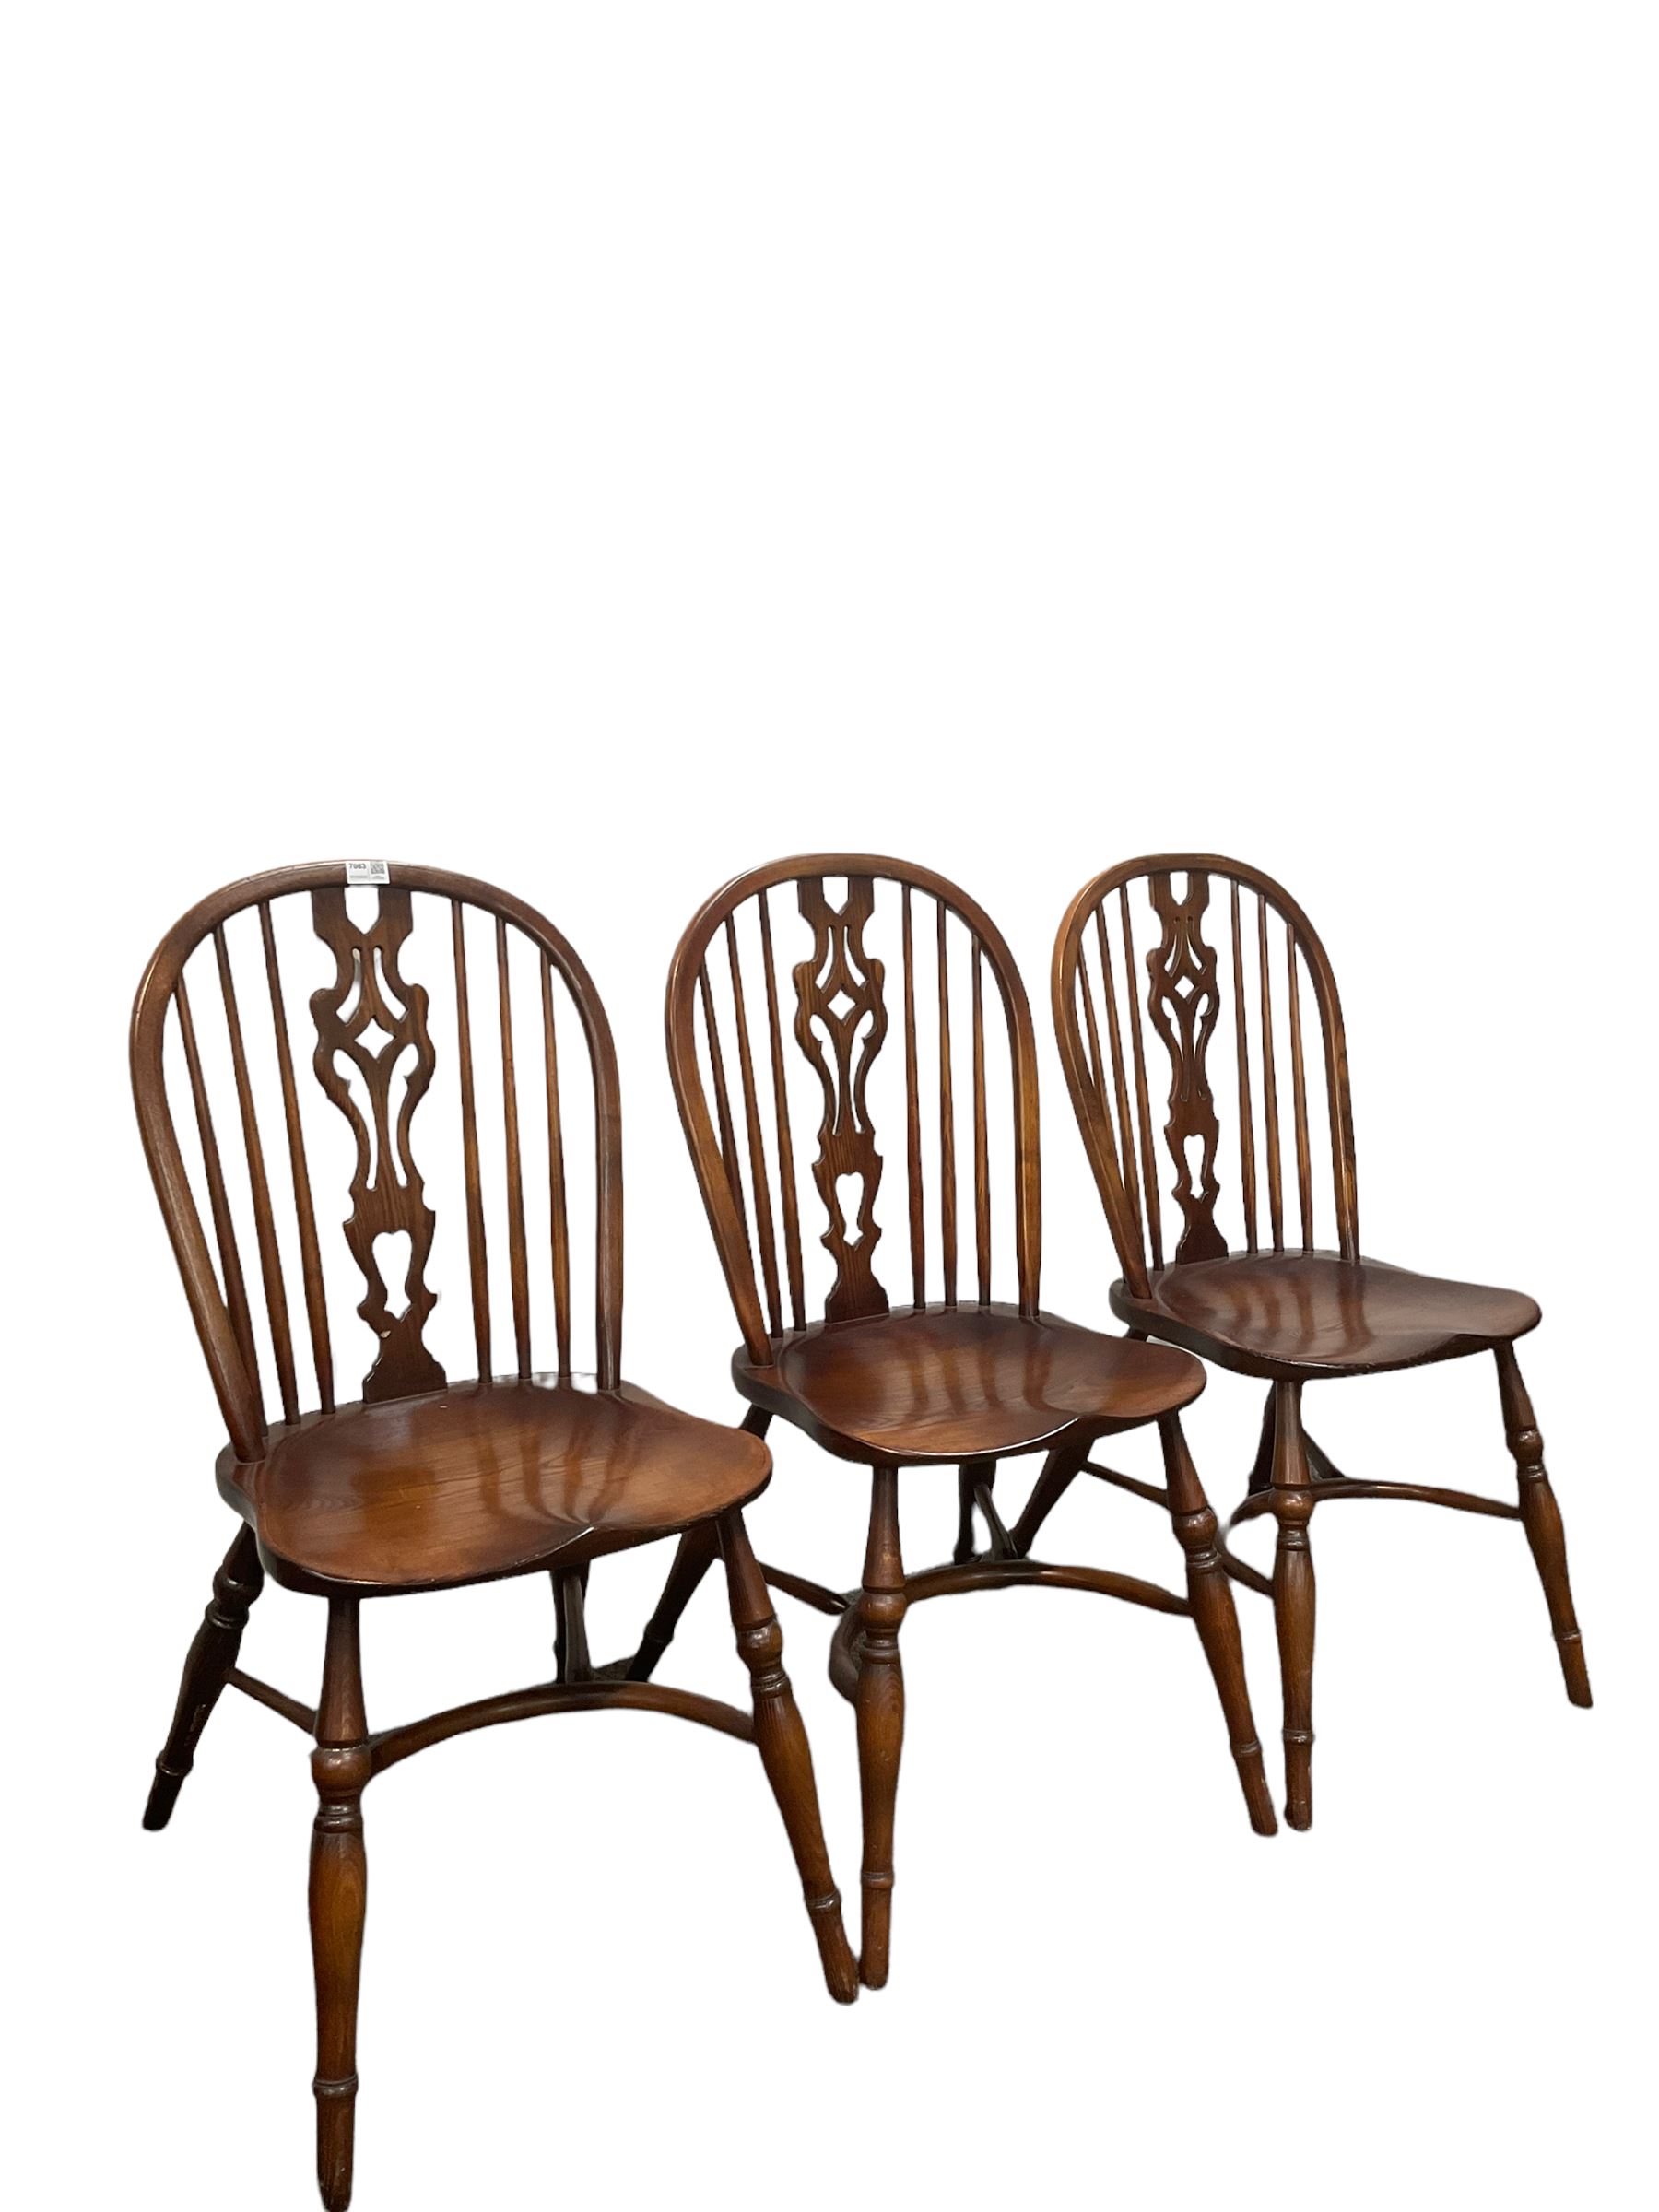 Set three dining chairs - Image 2 of 4